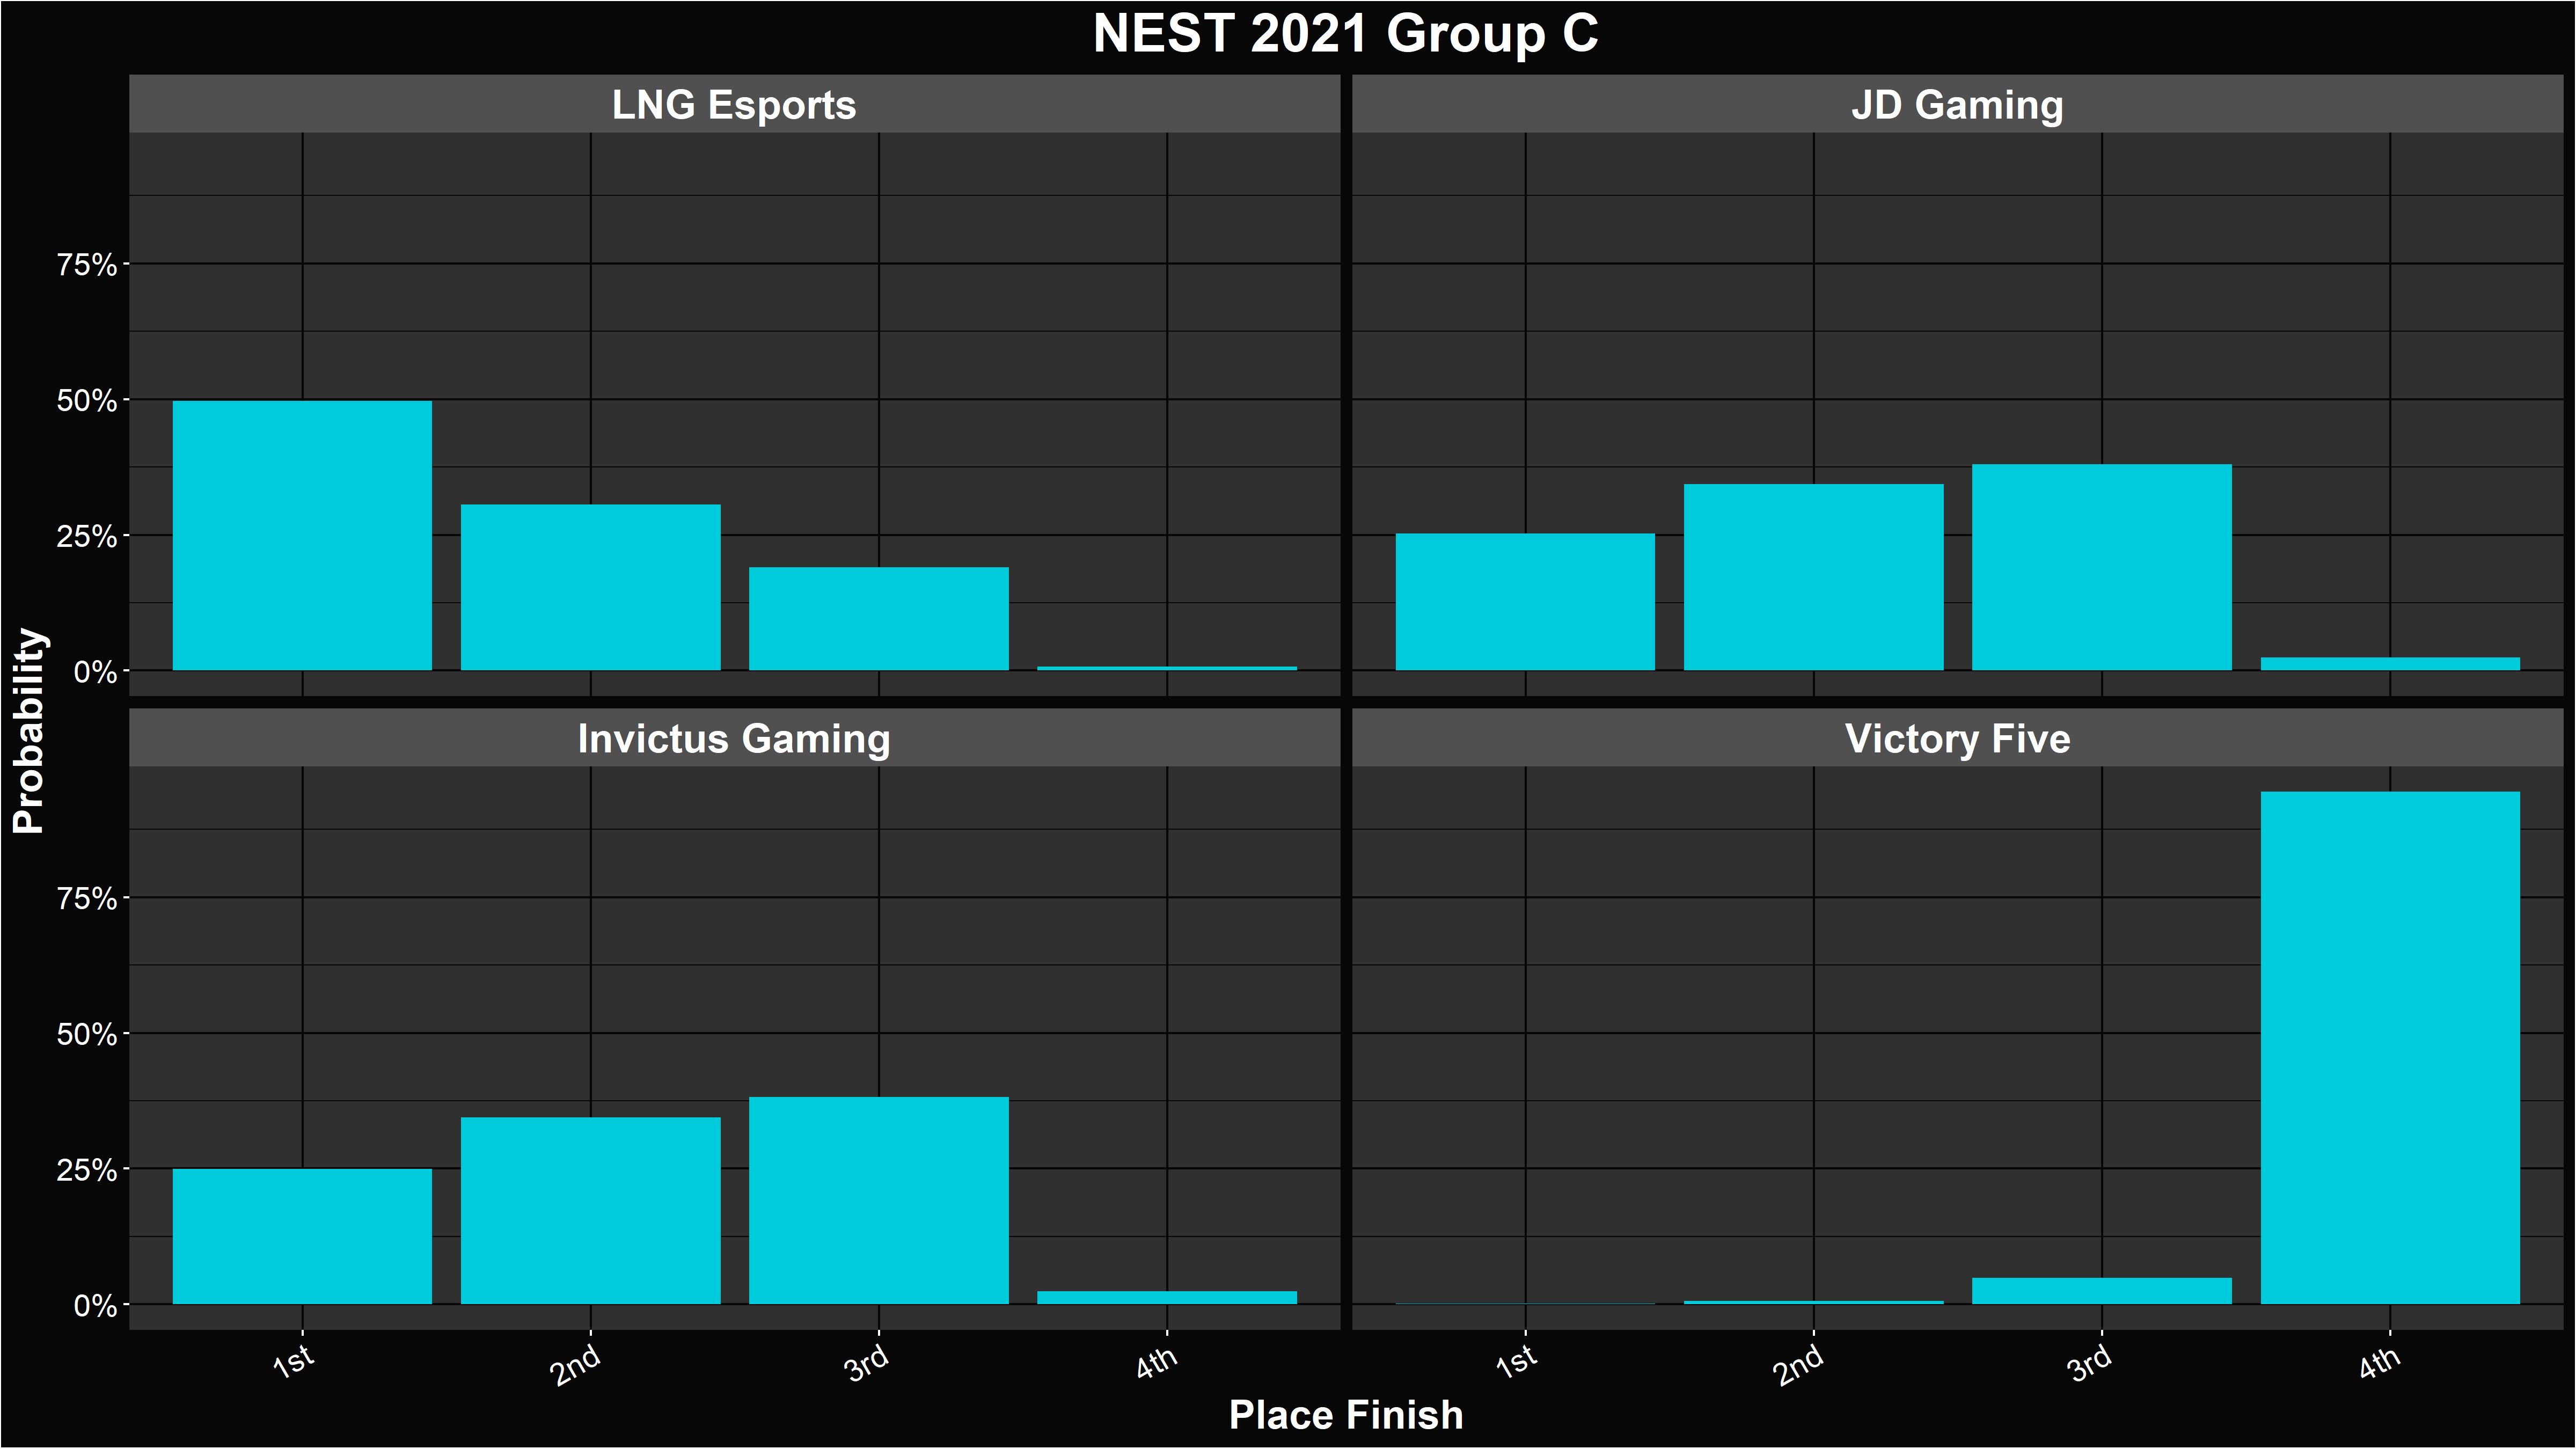 Alacrity's NEST 2021 Group C Placement Distributions